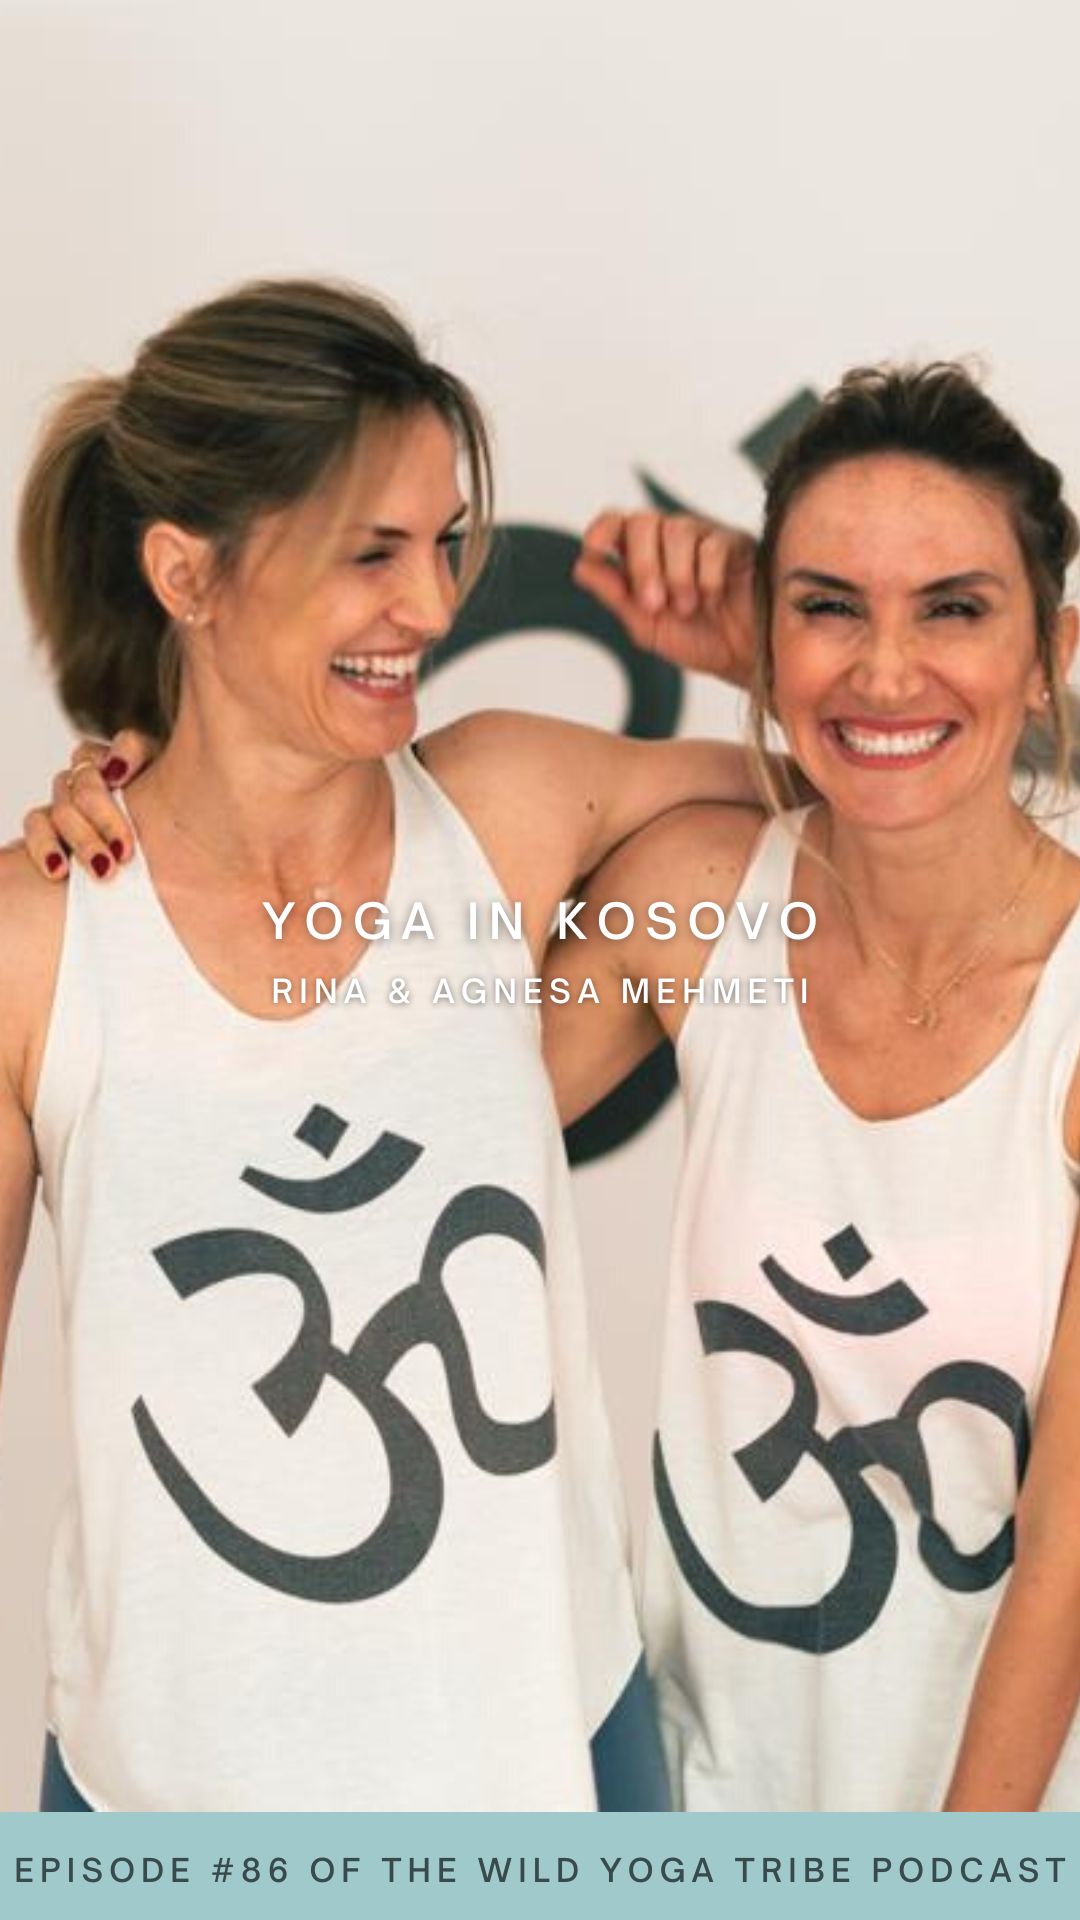 Meet Rina and Agnesa Mehmeti, the dynamic sister duo behind Urban Yoga in Kosovo. They share their incredible journey of opening a yoga studio in a country that was relatively unfamiliar with yoga just a few years ago. Welcome to yoga in Kosovo. yogakosovo, kosovoyoga, urbanyoga, yogainkosovo, visitkosovo, travelkosovo, yogaaroundtheworld, globalyoga, internationalyoga, wildyogatribe, yogateacher, yogateacherstory